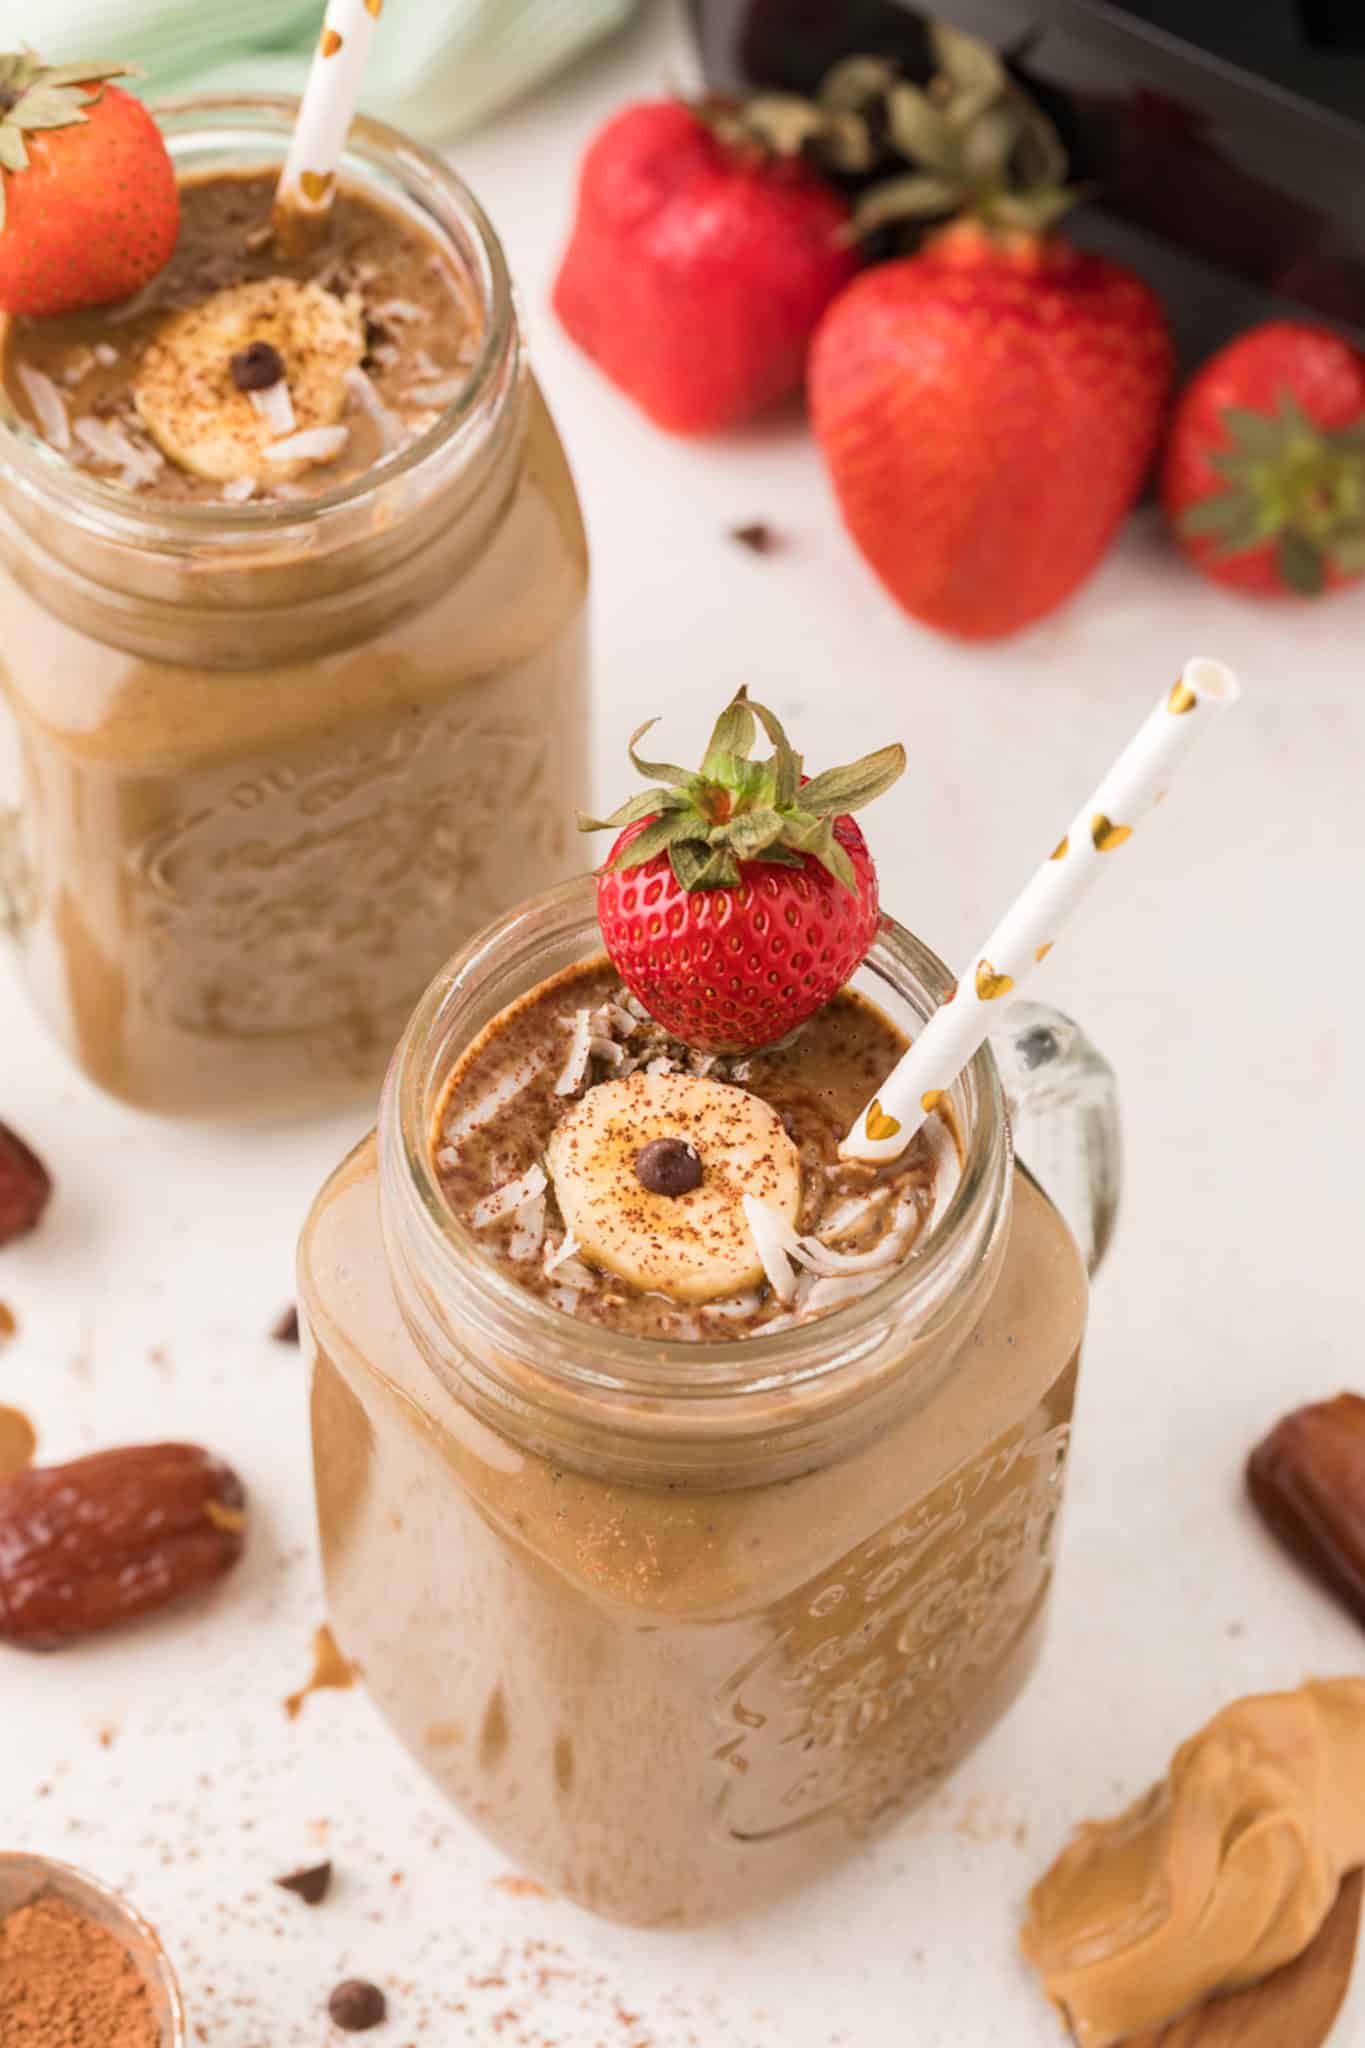 chocolate smoothie with strawberries and banana served in a jar